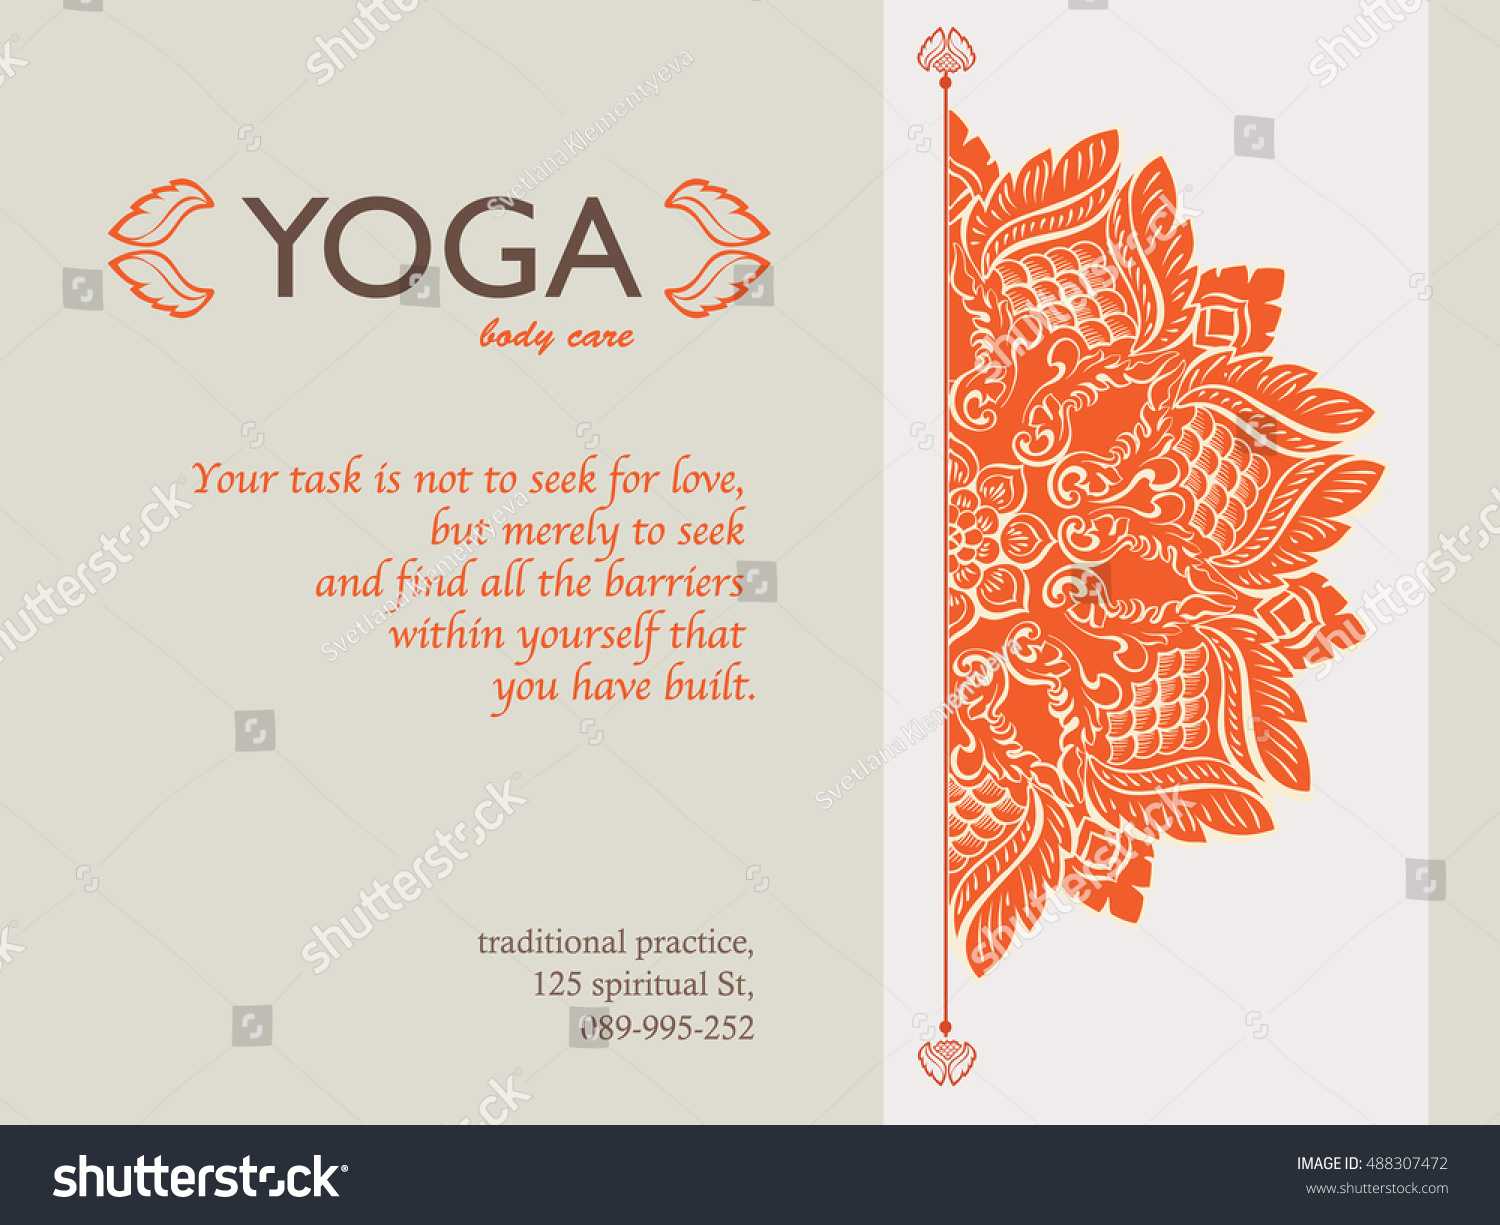 Yoga Gift Certificate Templates | Gift Certificate Templates Intended For Yoga Gift Certificate Template Free